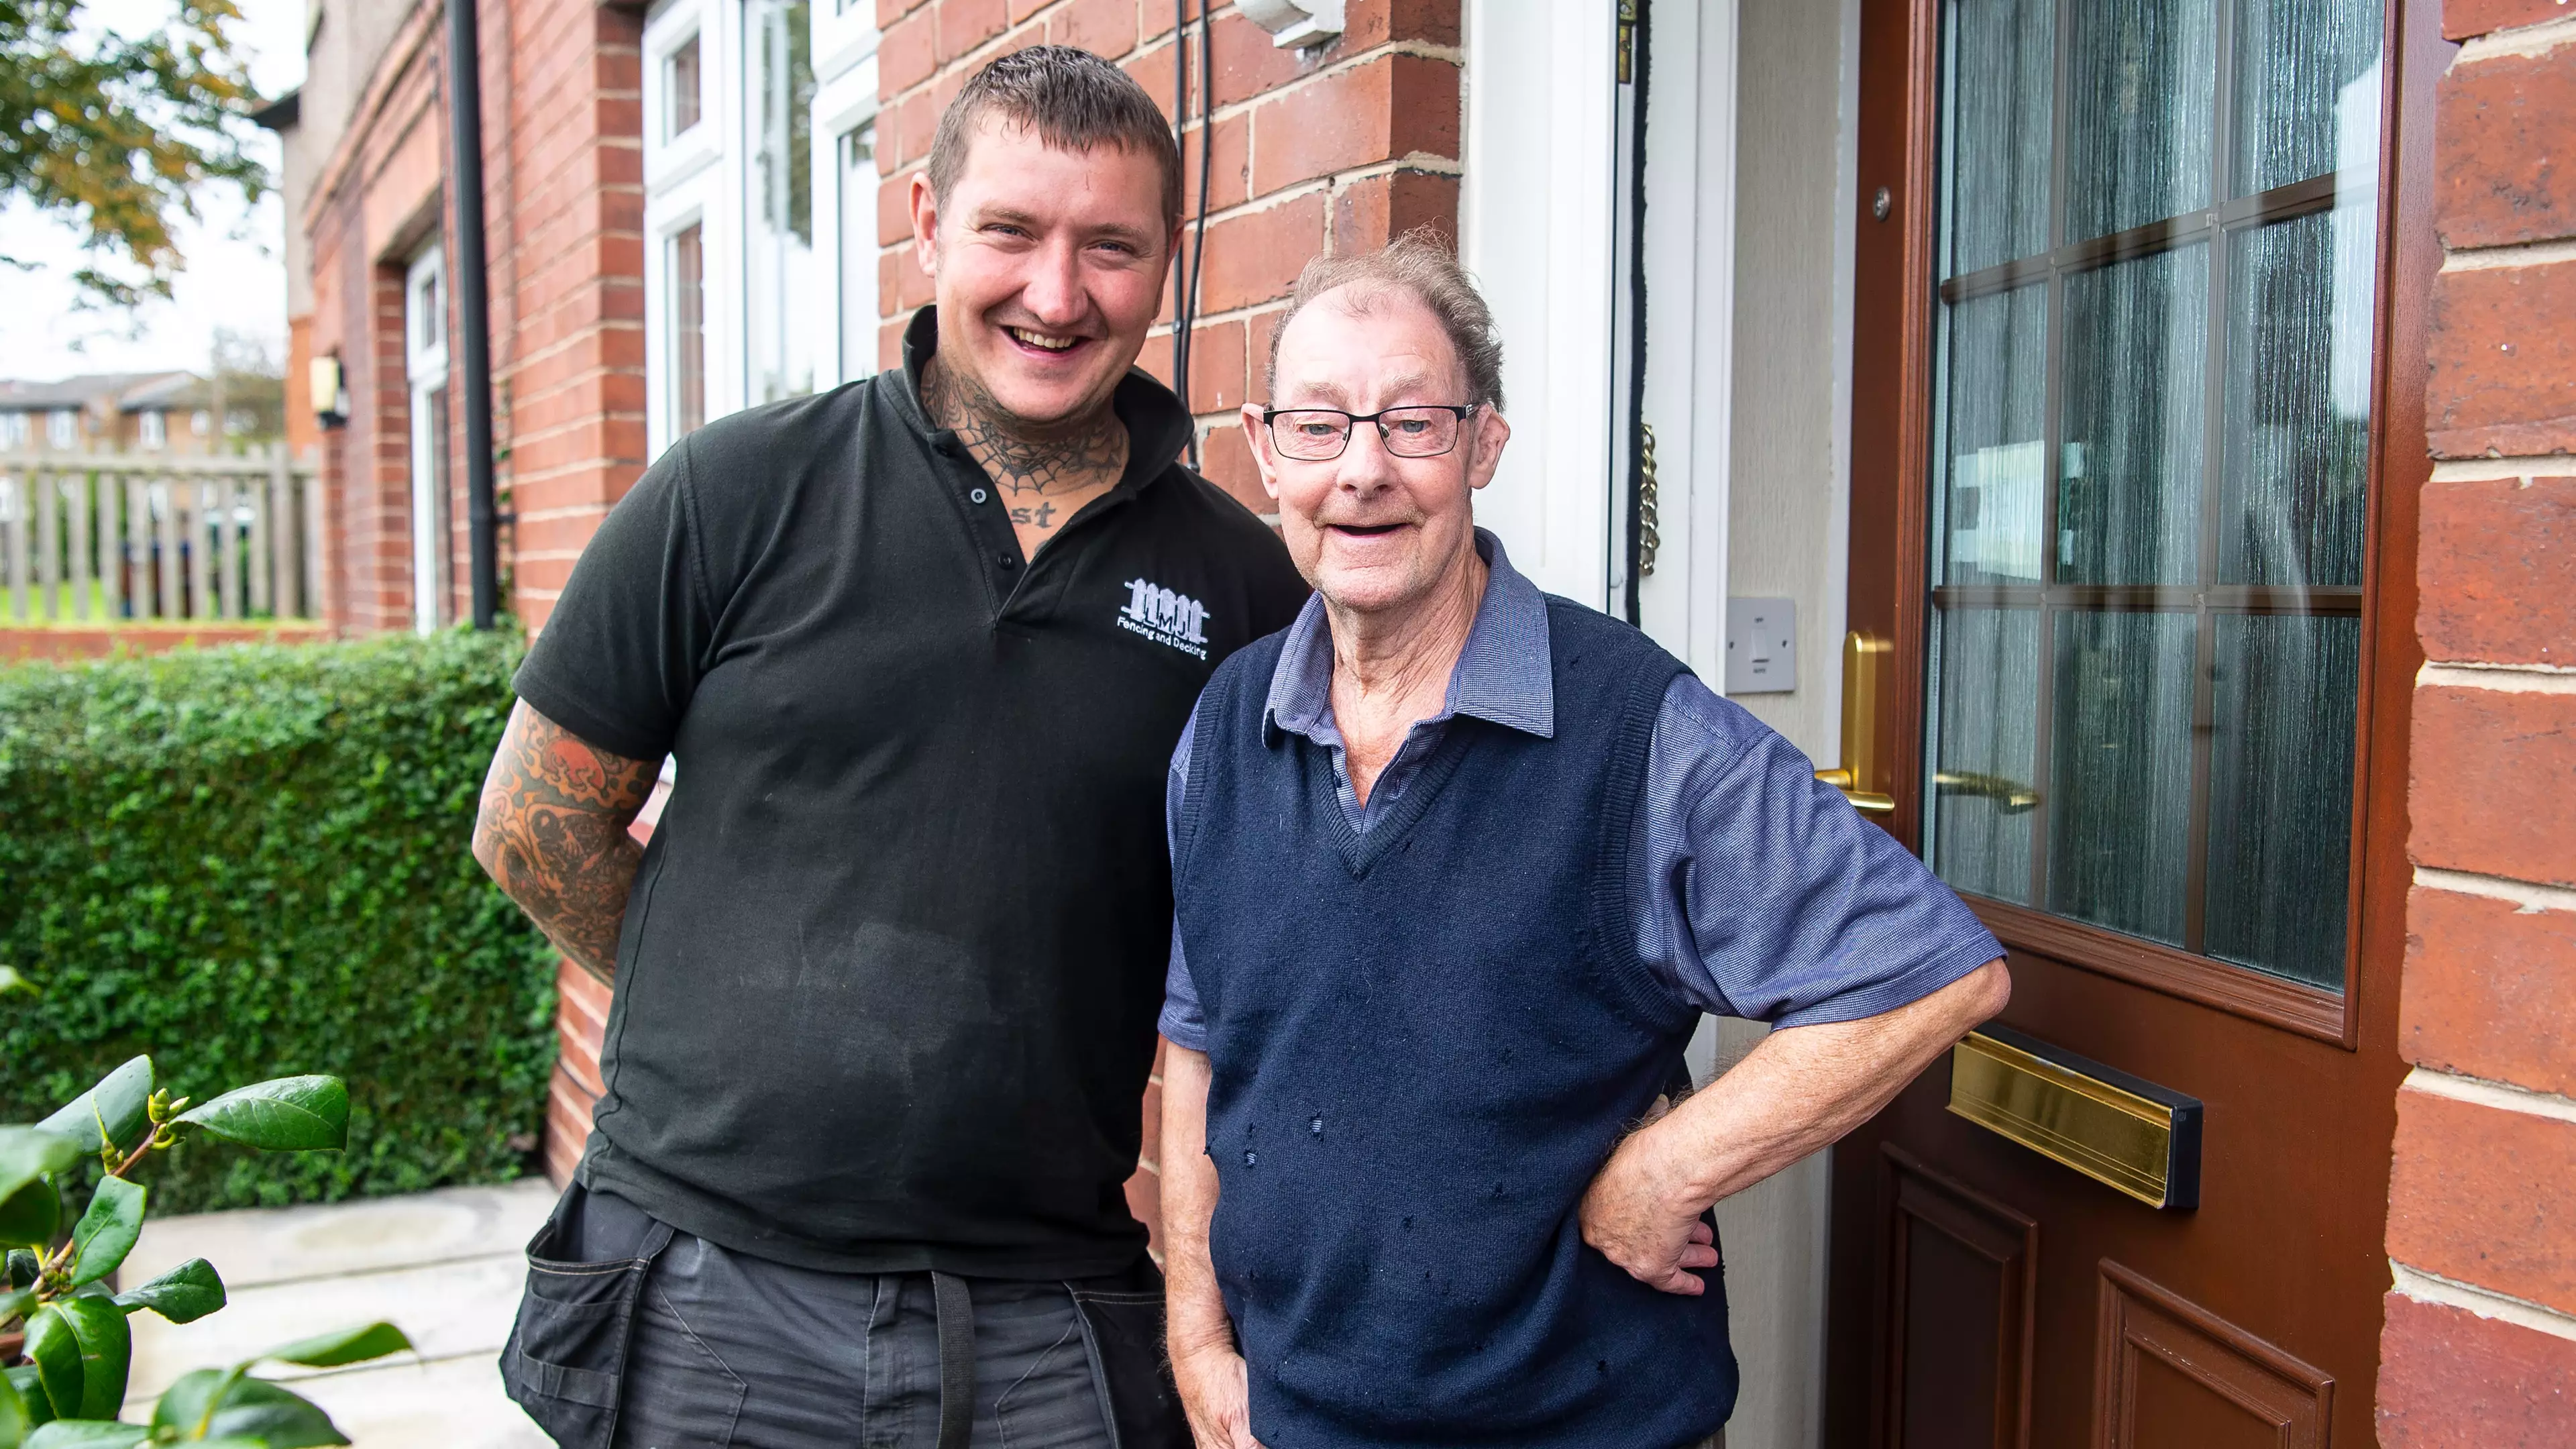 Workman Quotes Pensioner 'Cup Of Tea And A Chat' In Exchange For Work